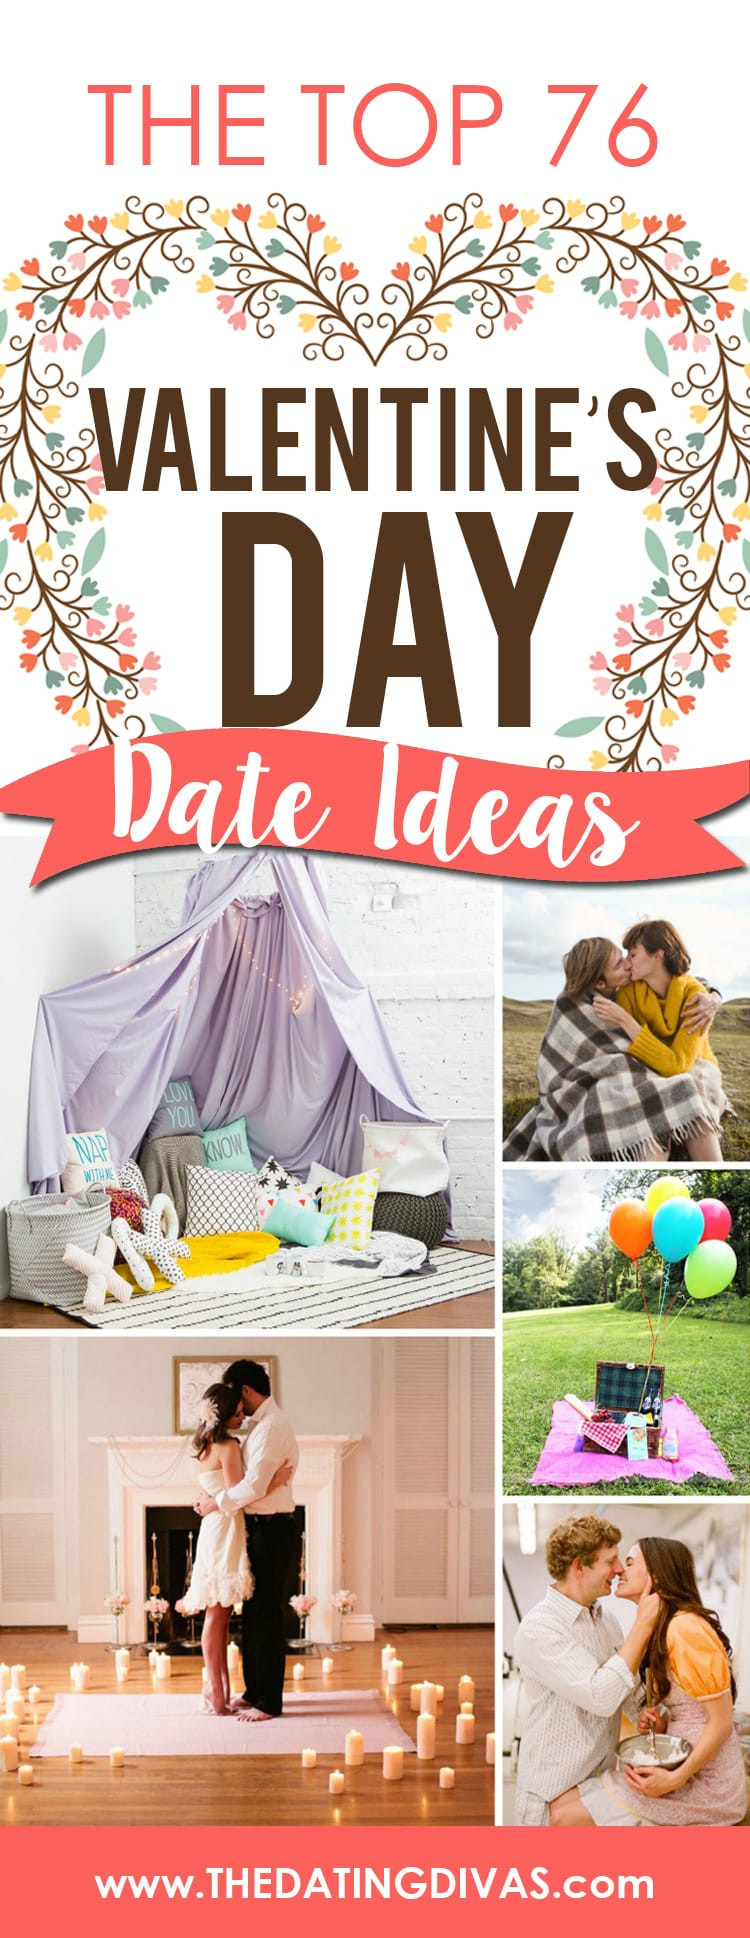 Valentines Day Date Ideas
 The Top Valentine Day Date Ideas